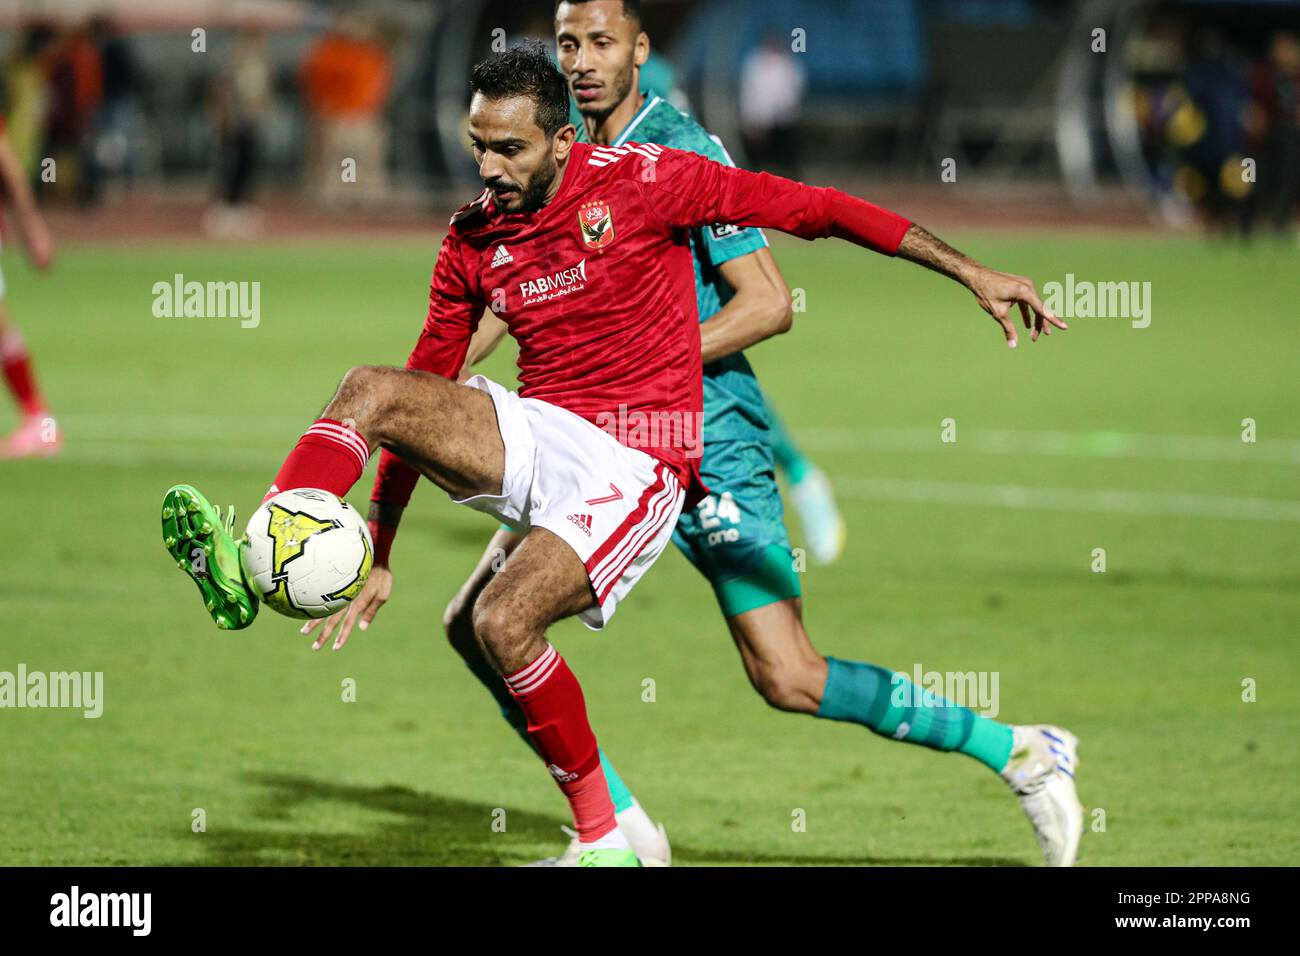 Cairo. 22nd Apr, 2023. Kahraba (front) of Al Ahly competes during a Confederation of African Football (CAF) Champions League quarterfinal match between Al Ahly and Raja Casablanca in Cairo, Egypt on April 22, 2023. Credit: Ahmed Gomaa/Xinhua/Alamy Live News Stock Photo